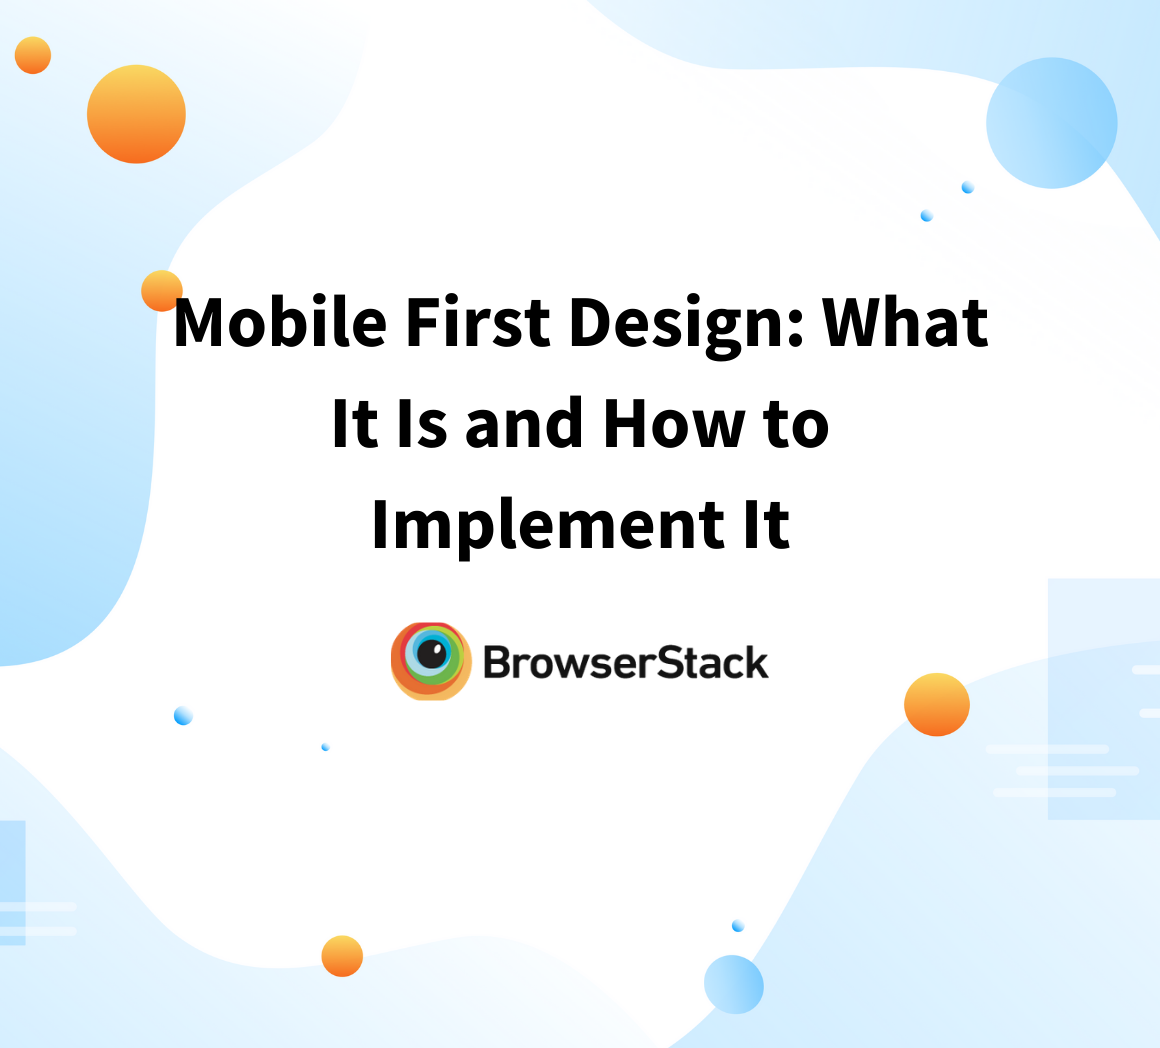 Mobile First Design: What It Is and How to Implement It